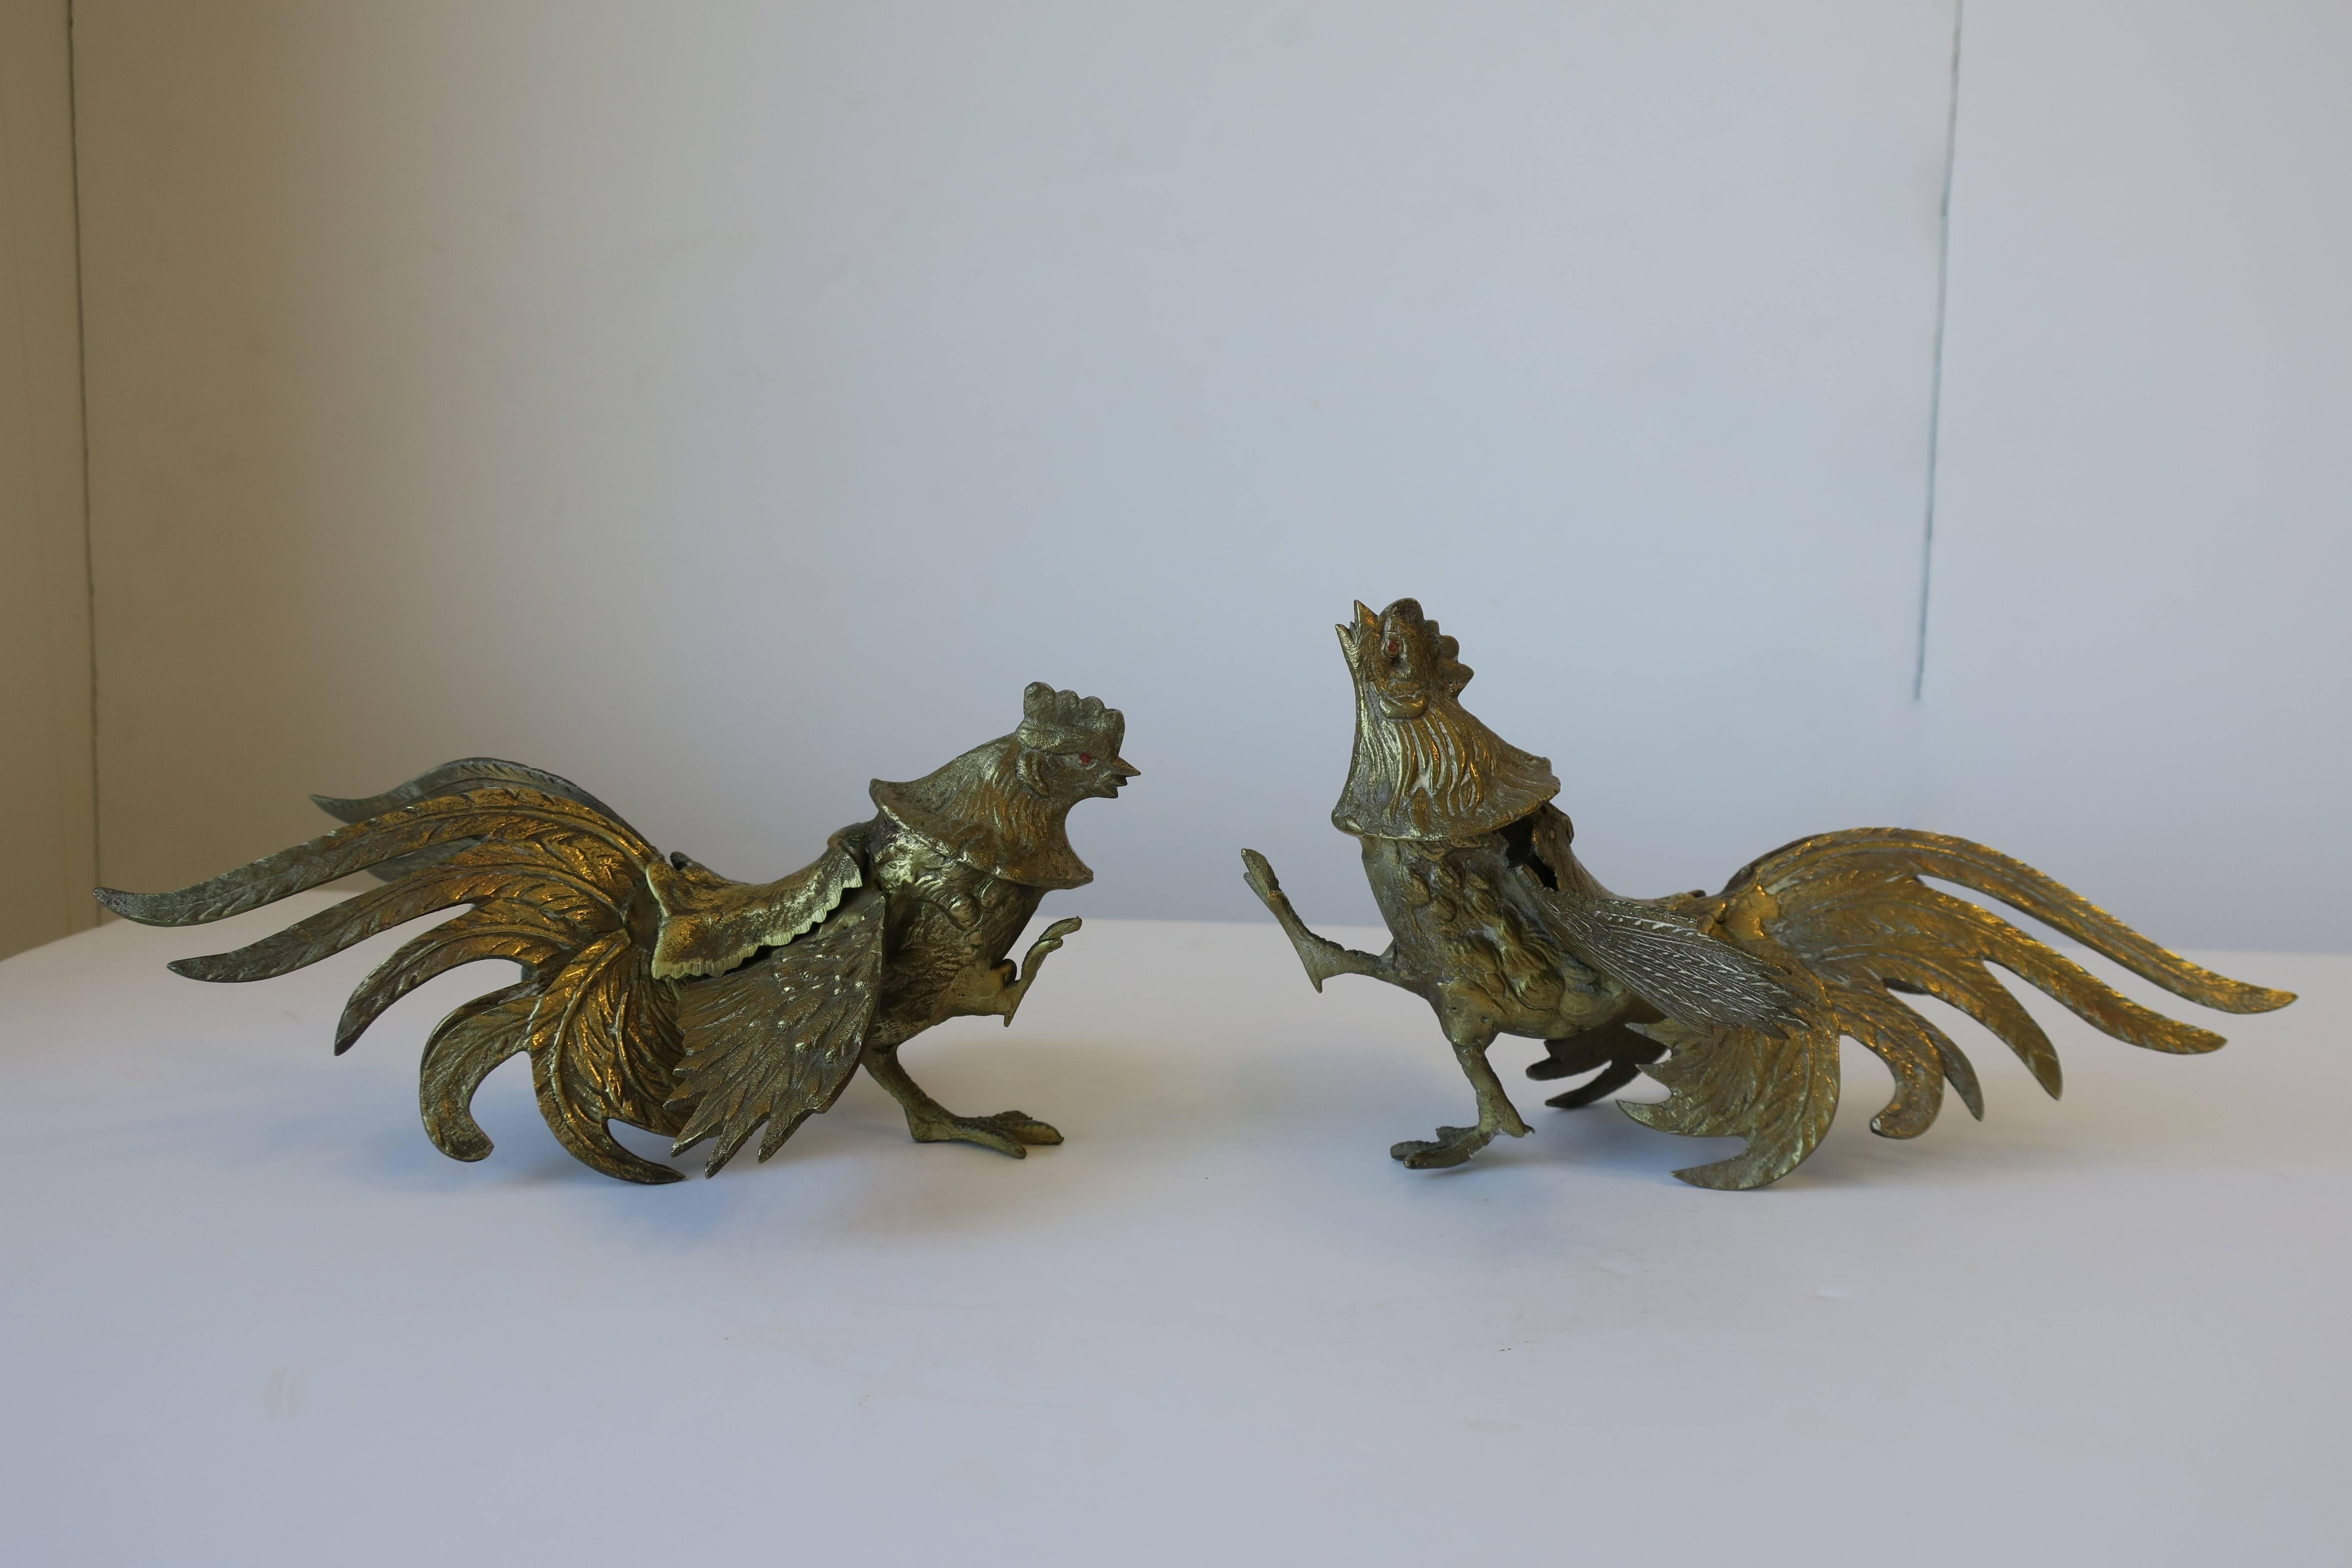 A substantial and detailed pair of vintage brass 'fighting' rooster cock birds, circa Mid-Century 1960s. Approximate measurements include: 8.5 inches w x 4.75 high x 6.5 d. 

Pair available here online. By request, pair can be made available by